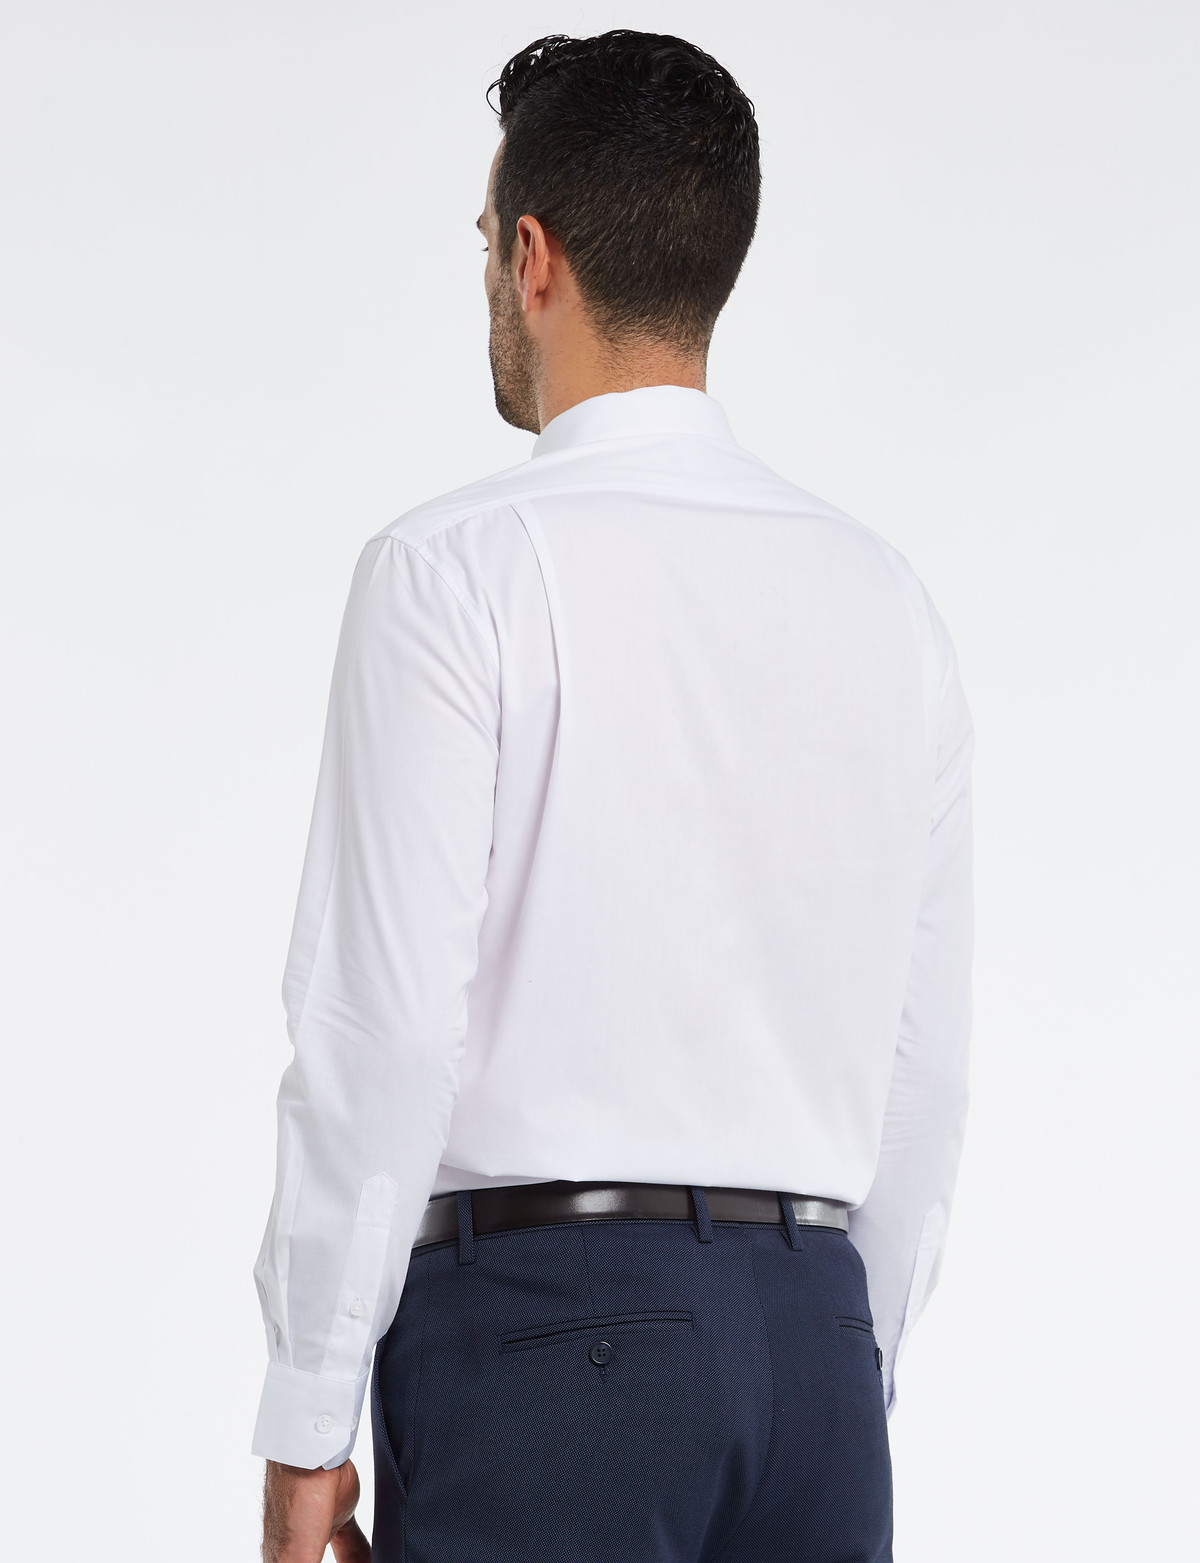 Chisel Tailored Fit Shirt, White - Formal Shirts